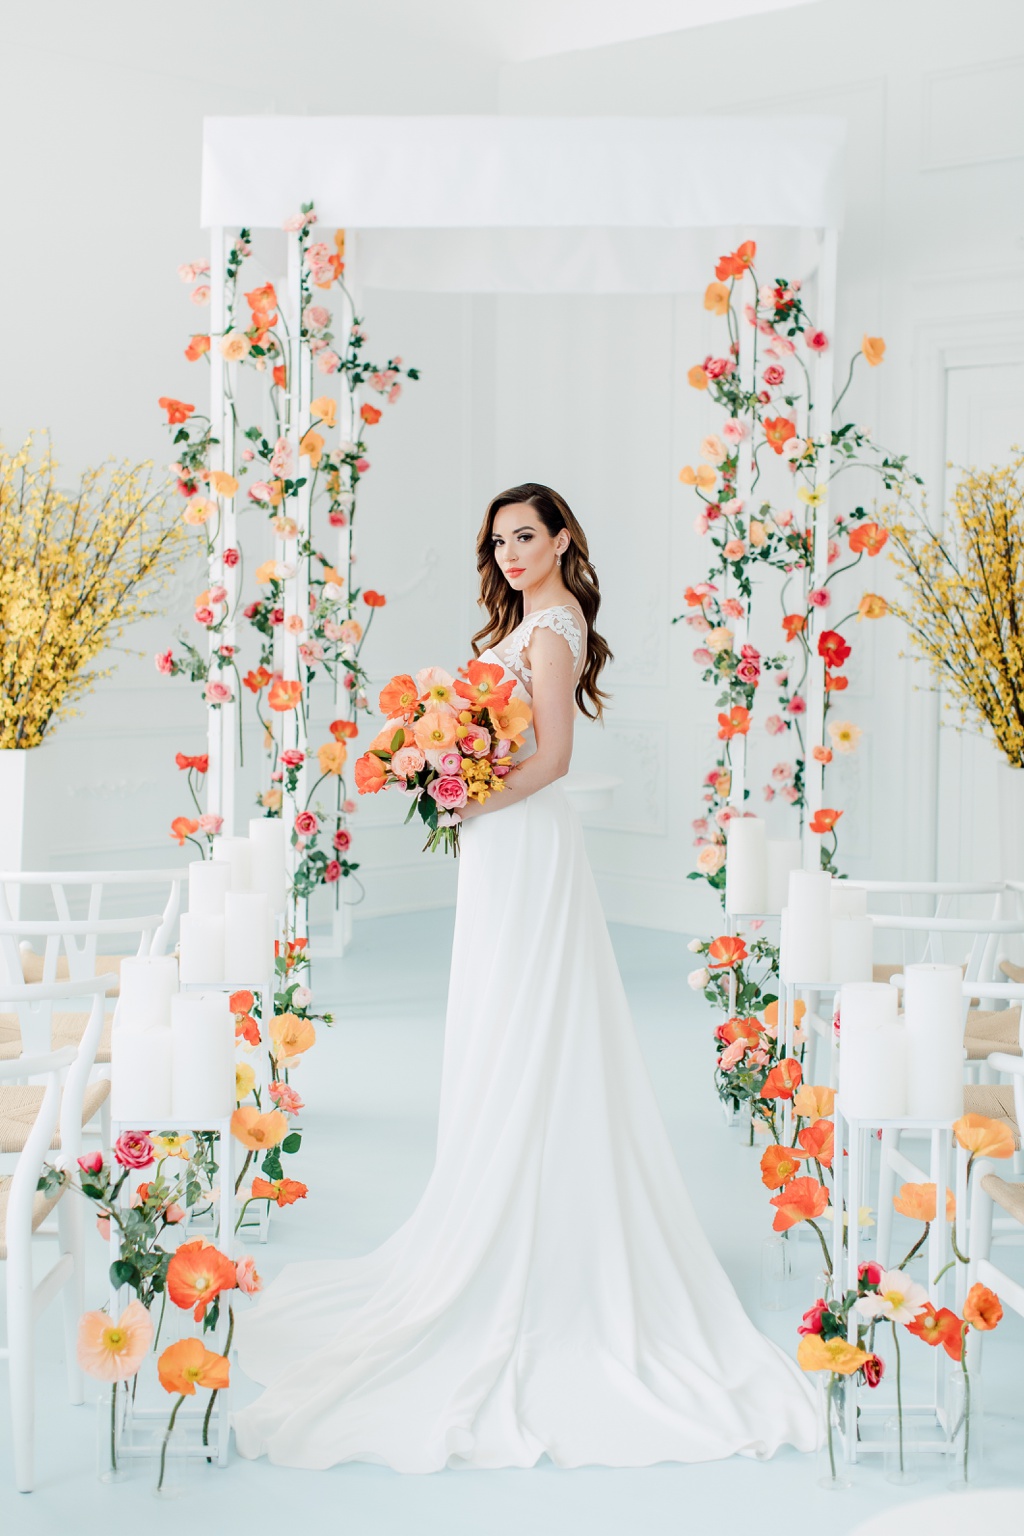 Mint Room Studios | WedLuxe Editorial | Playful Poppies | Fancy Face